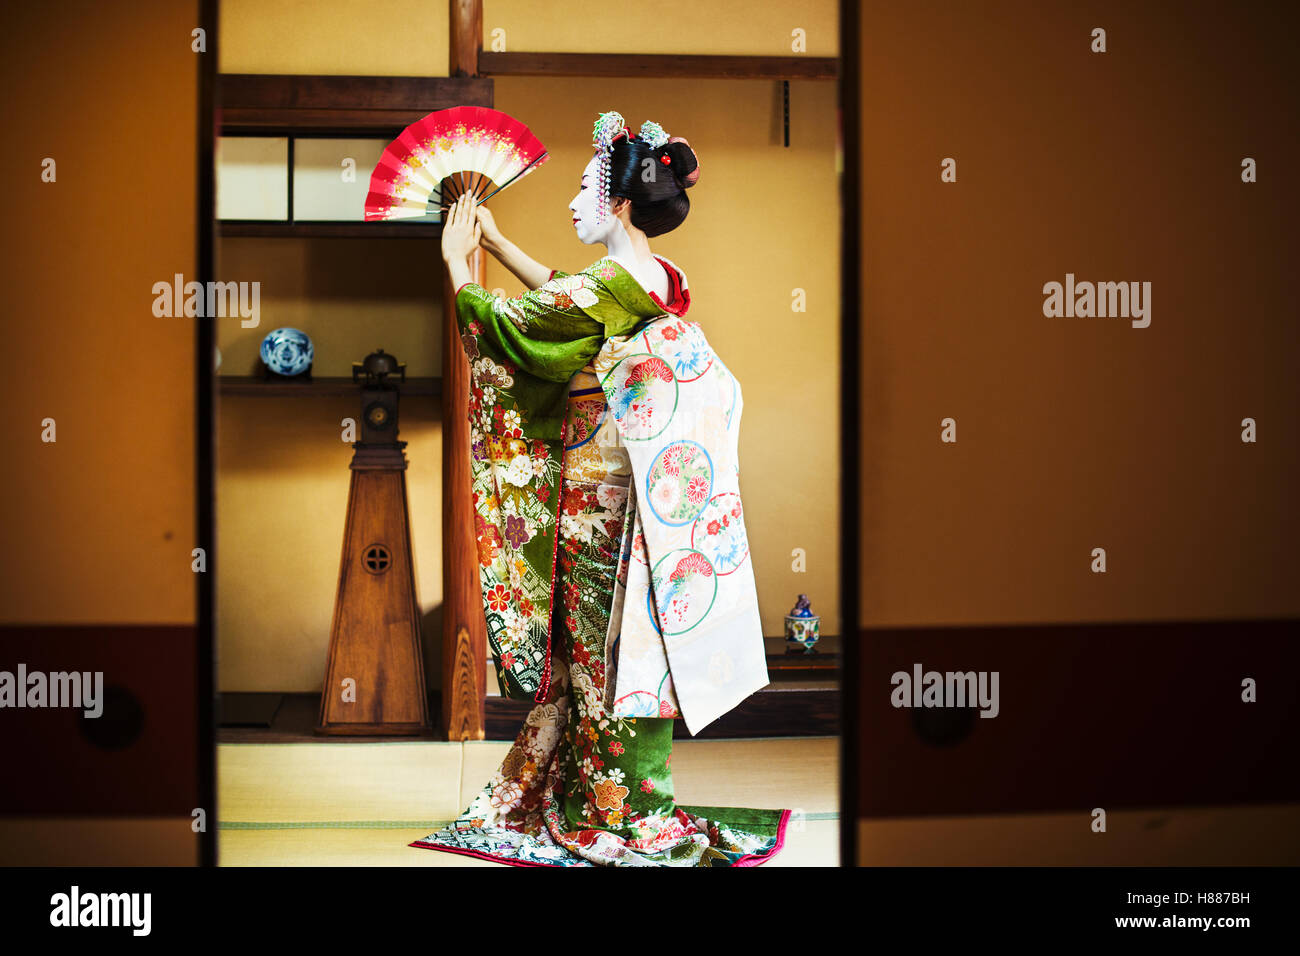 A woman dressed in the traditional geisha style, wearing a kimono and obi, Standing in a classic pose with fan raised Stock Photo